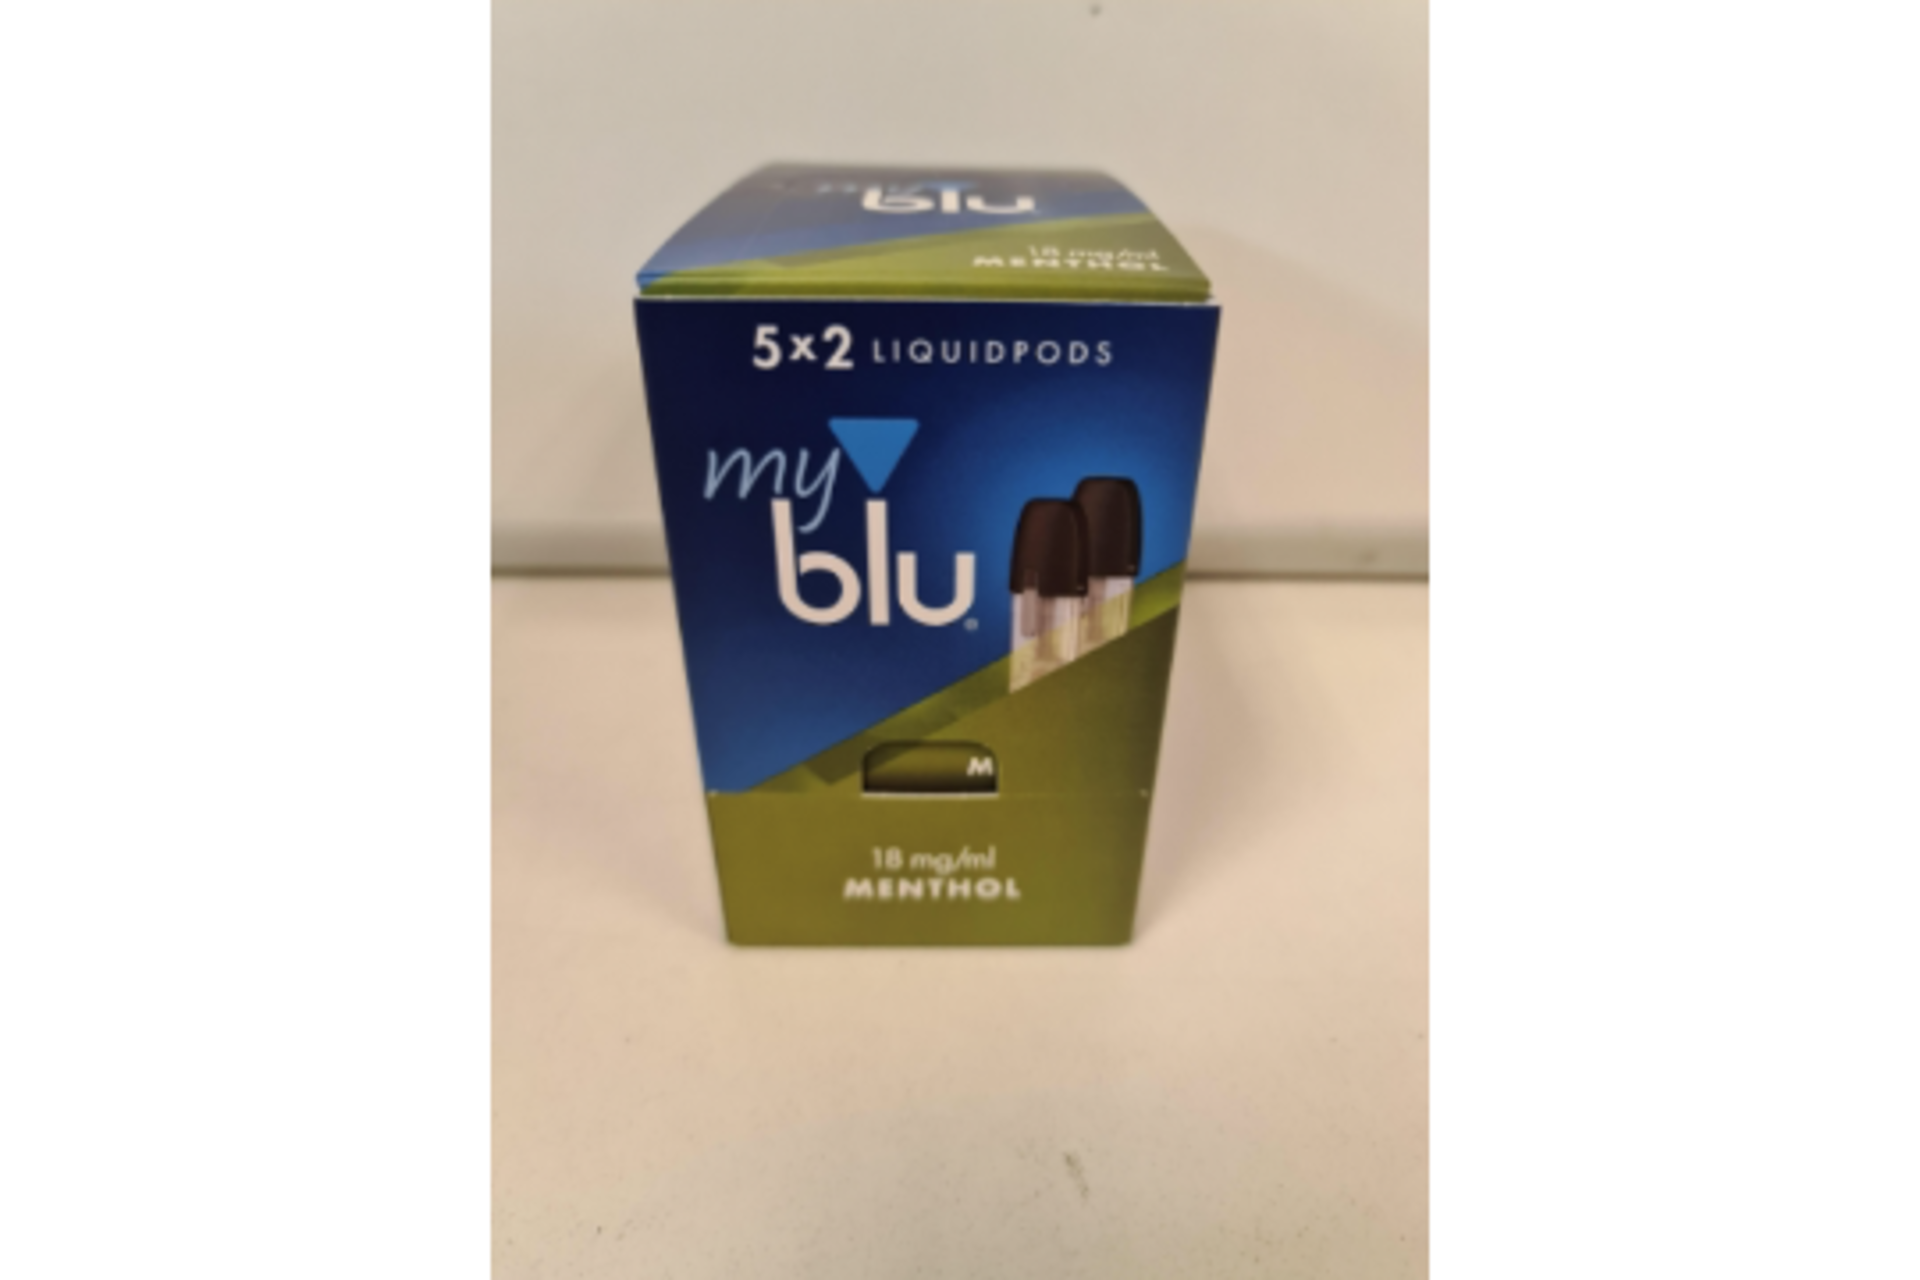 PALLET TO CONTAIN 1200 x MY BLUE 18MG MENTHOL 2 PACK LIQUID PODS (2400 PODS TOTAL). RRP £8 PER PACK. - Image 2 of 2